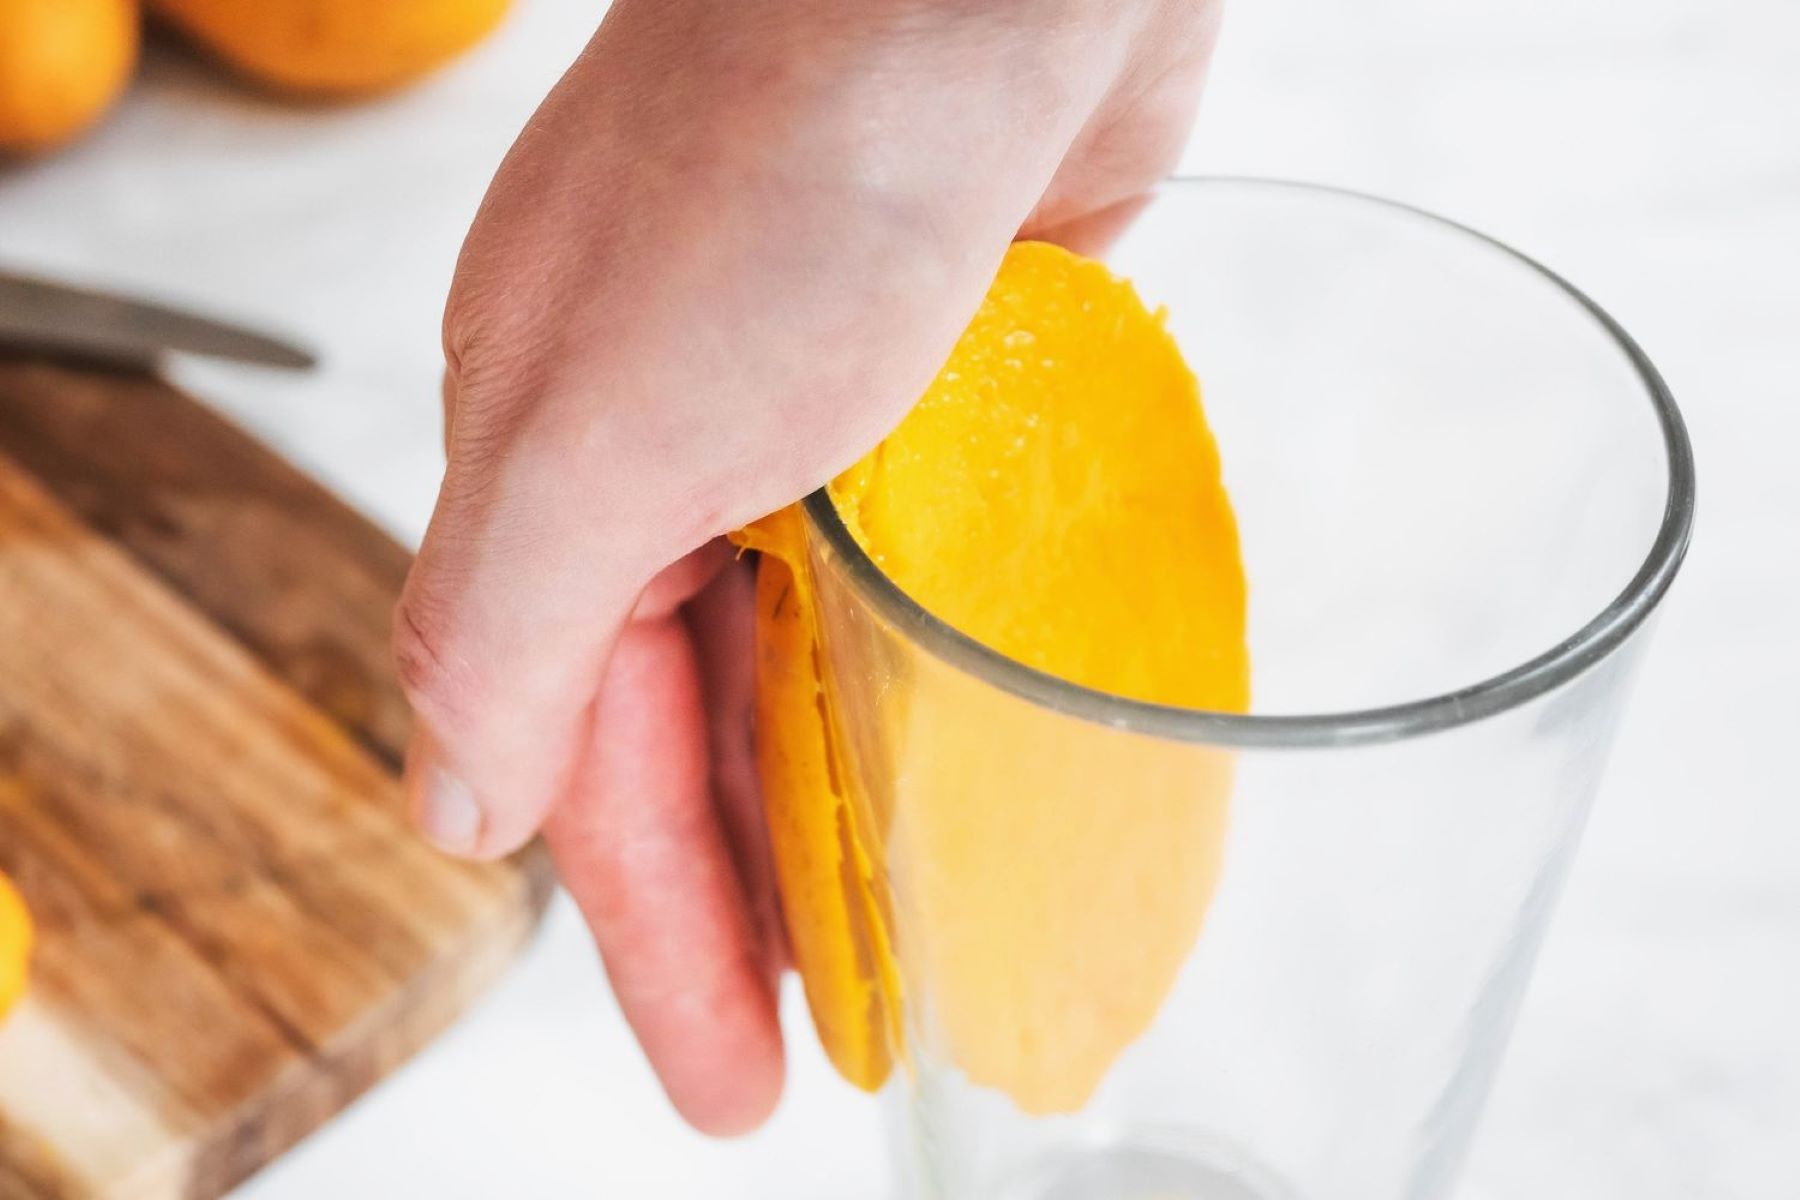 How To Peel A Mango With A Glass